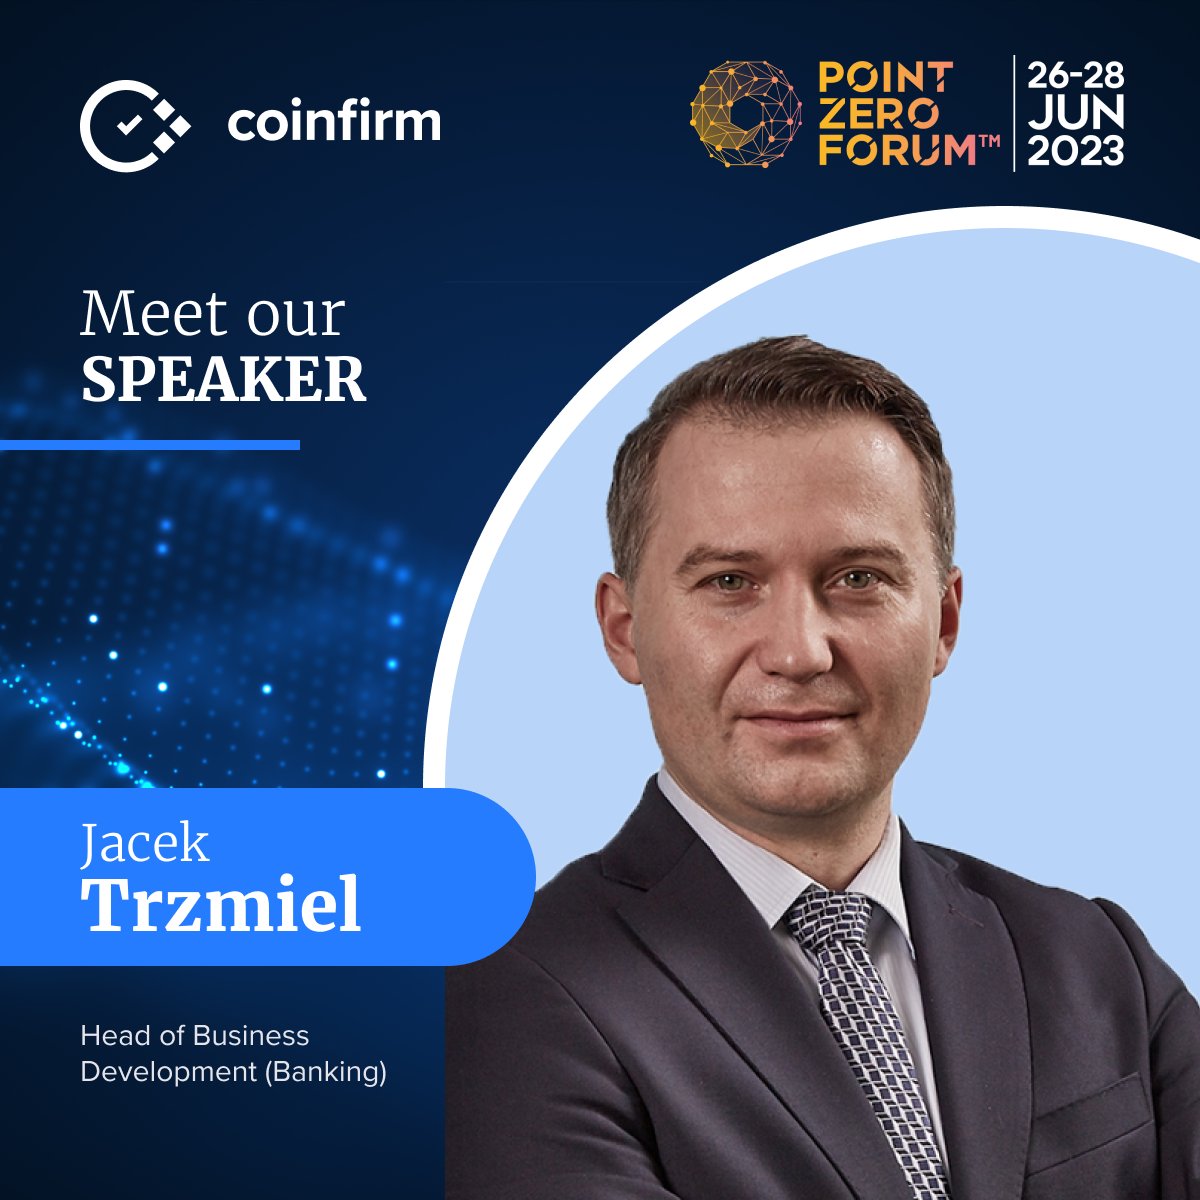 Jacek Trzmiel, our Head of Biz Dev, joins the elite panel at @pointzeroforum 2023 to discuss Decoding Crypto-Finance Regulations: MICA, Travel Rule, Privacy & AI. Don't miss this must-attend event for #crypto enthusiasts & investors!